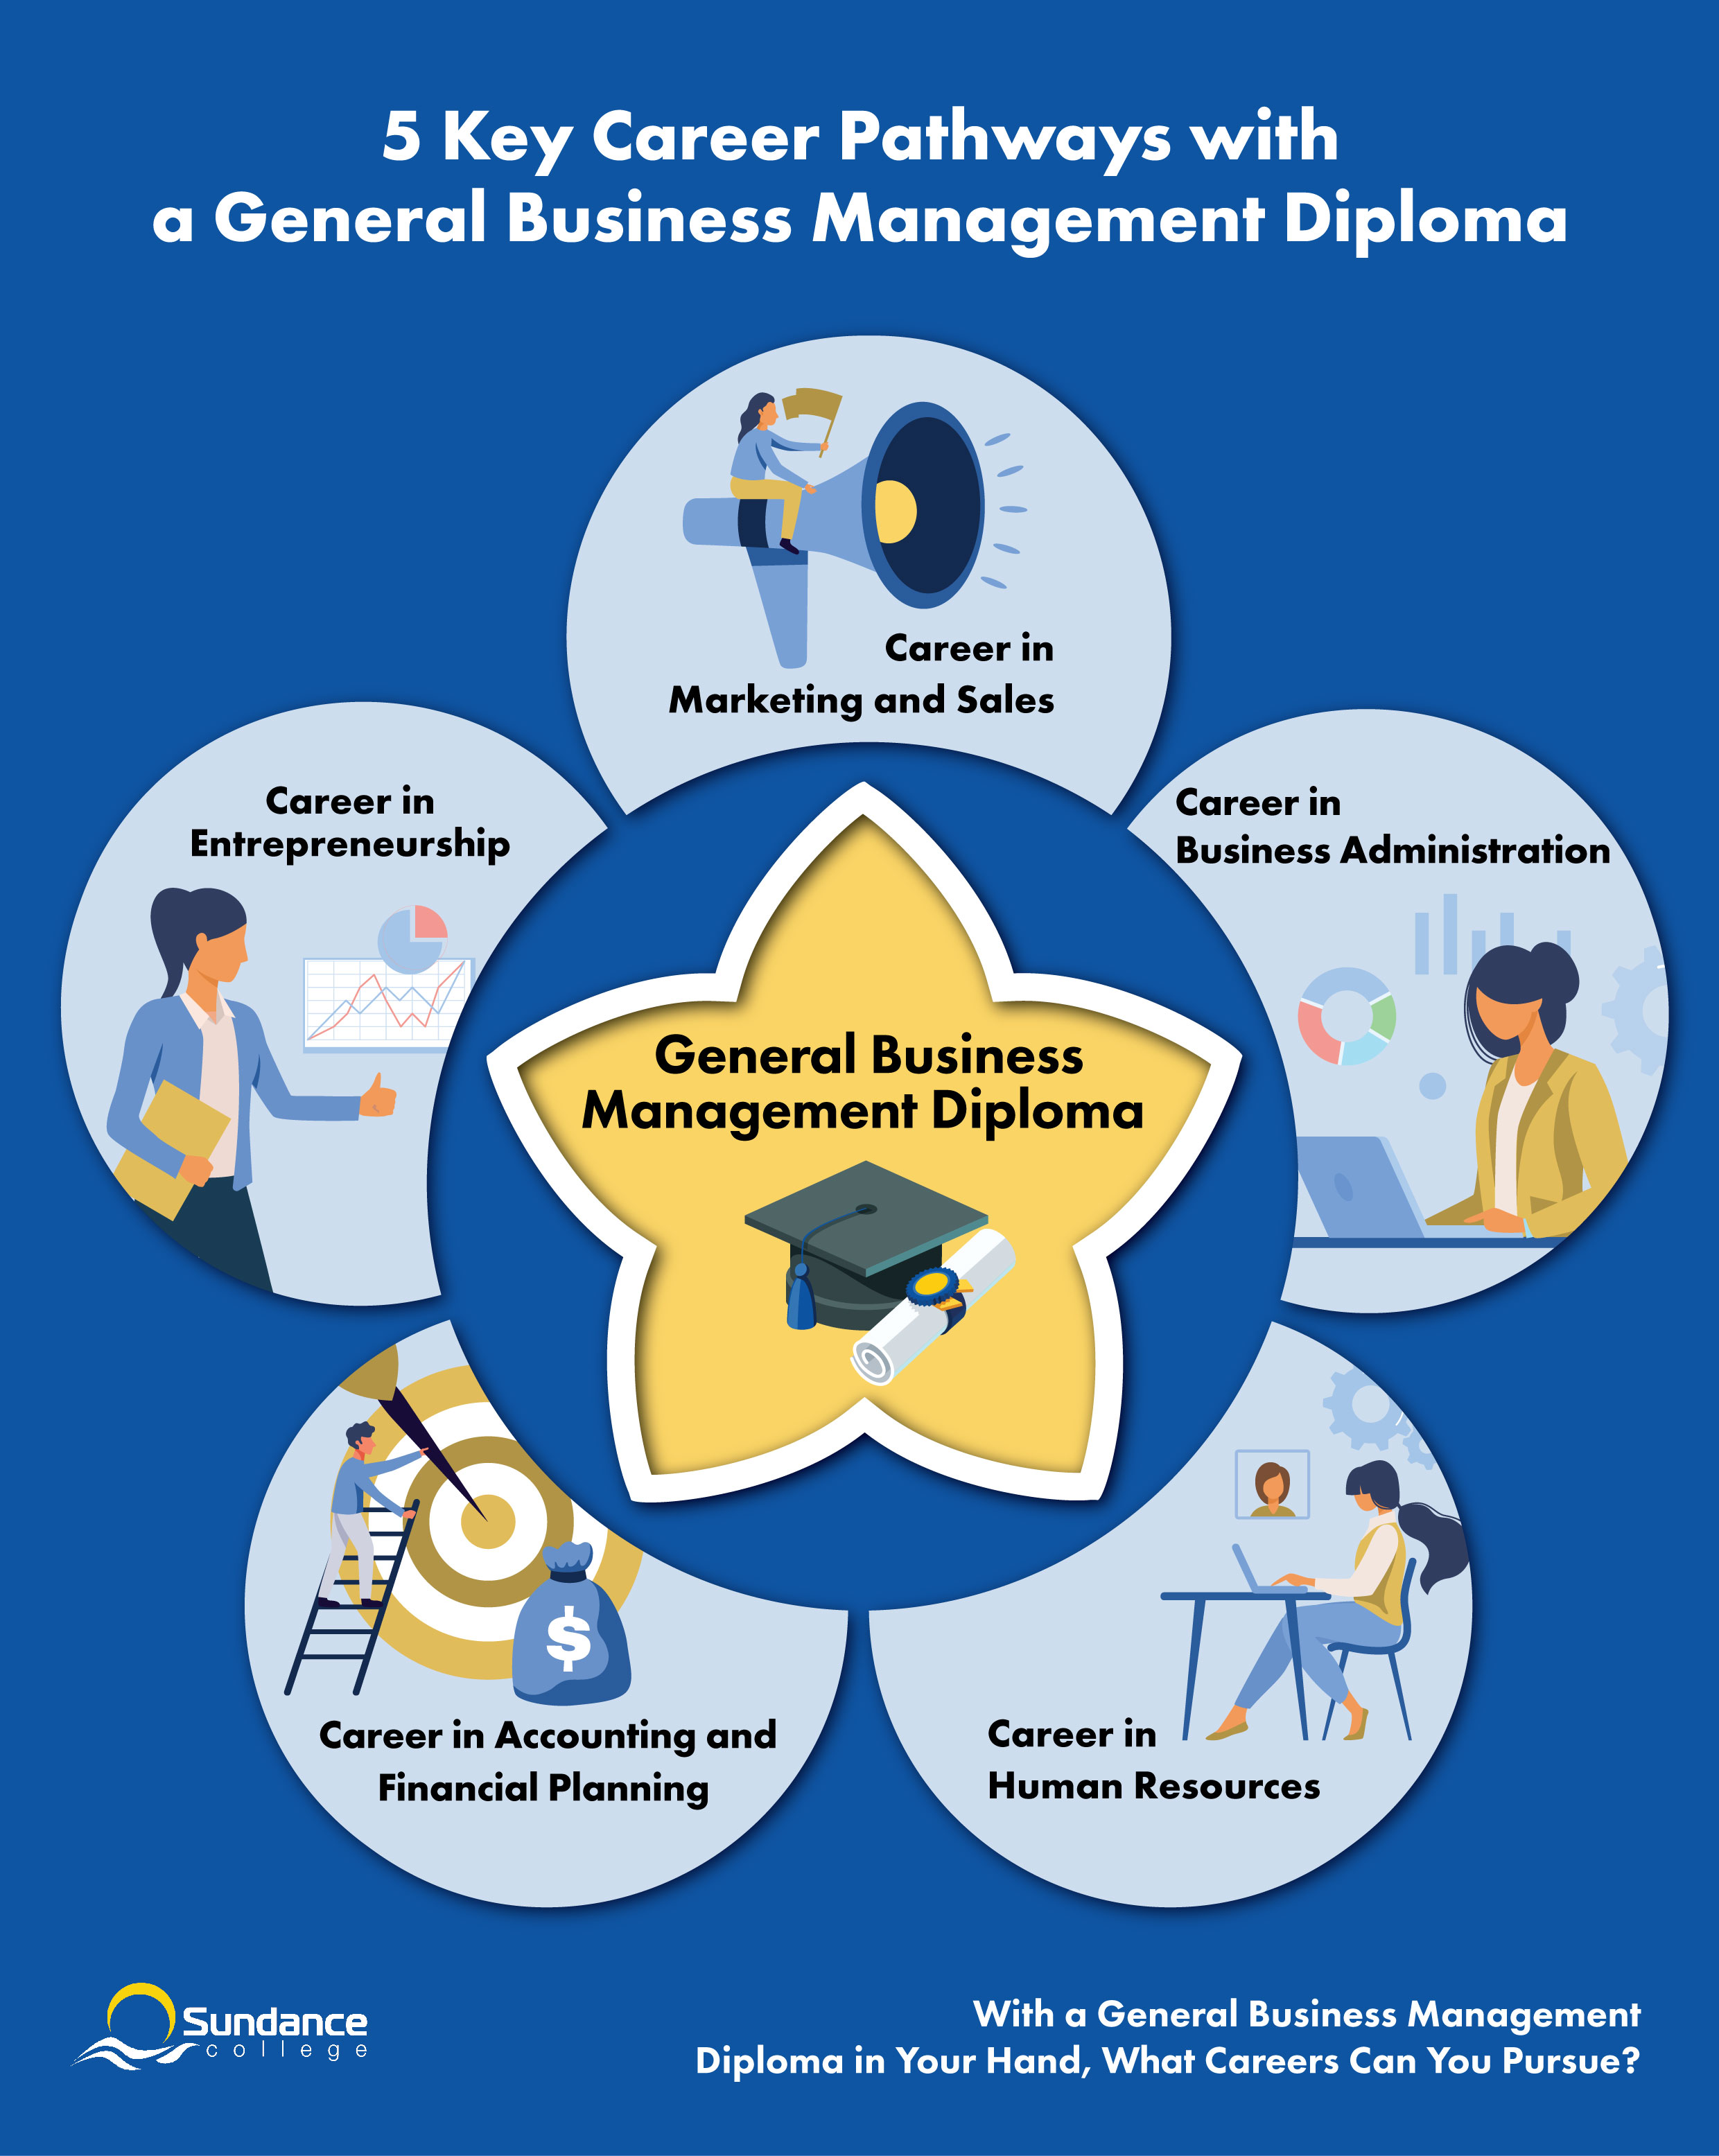 An infographic made by Sundance College about five key career paths with a General Business Management Diploma including career in Human Resources, Marketing and Sales, Financial Planning and Accounting, Business Administration, and Entrepreneurship.